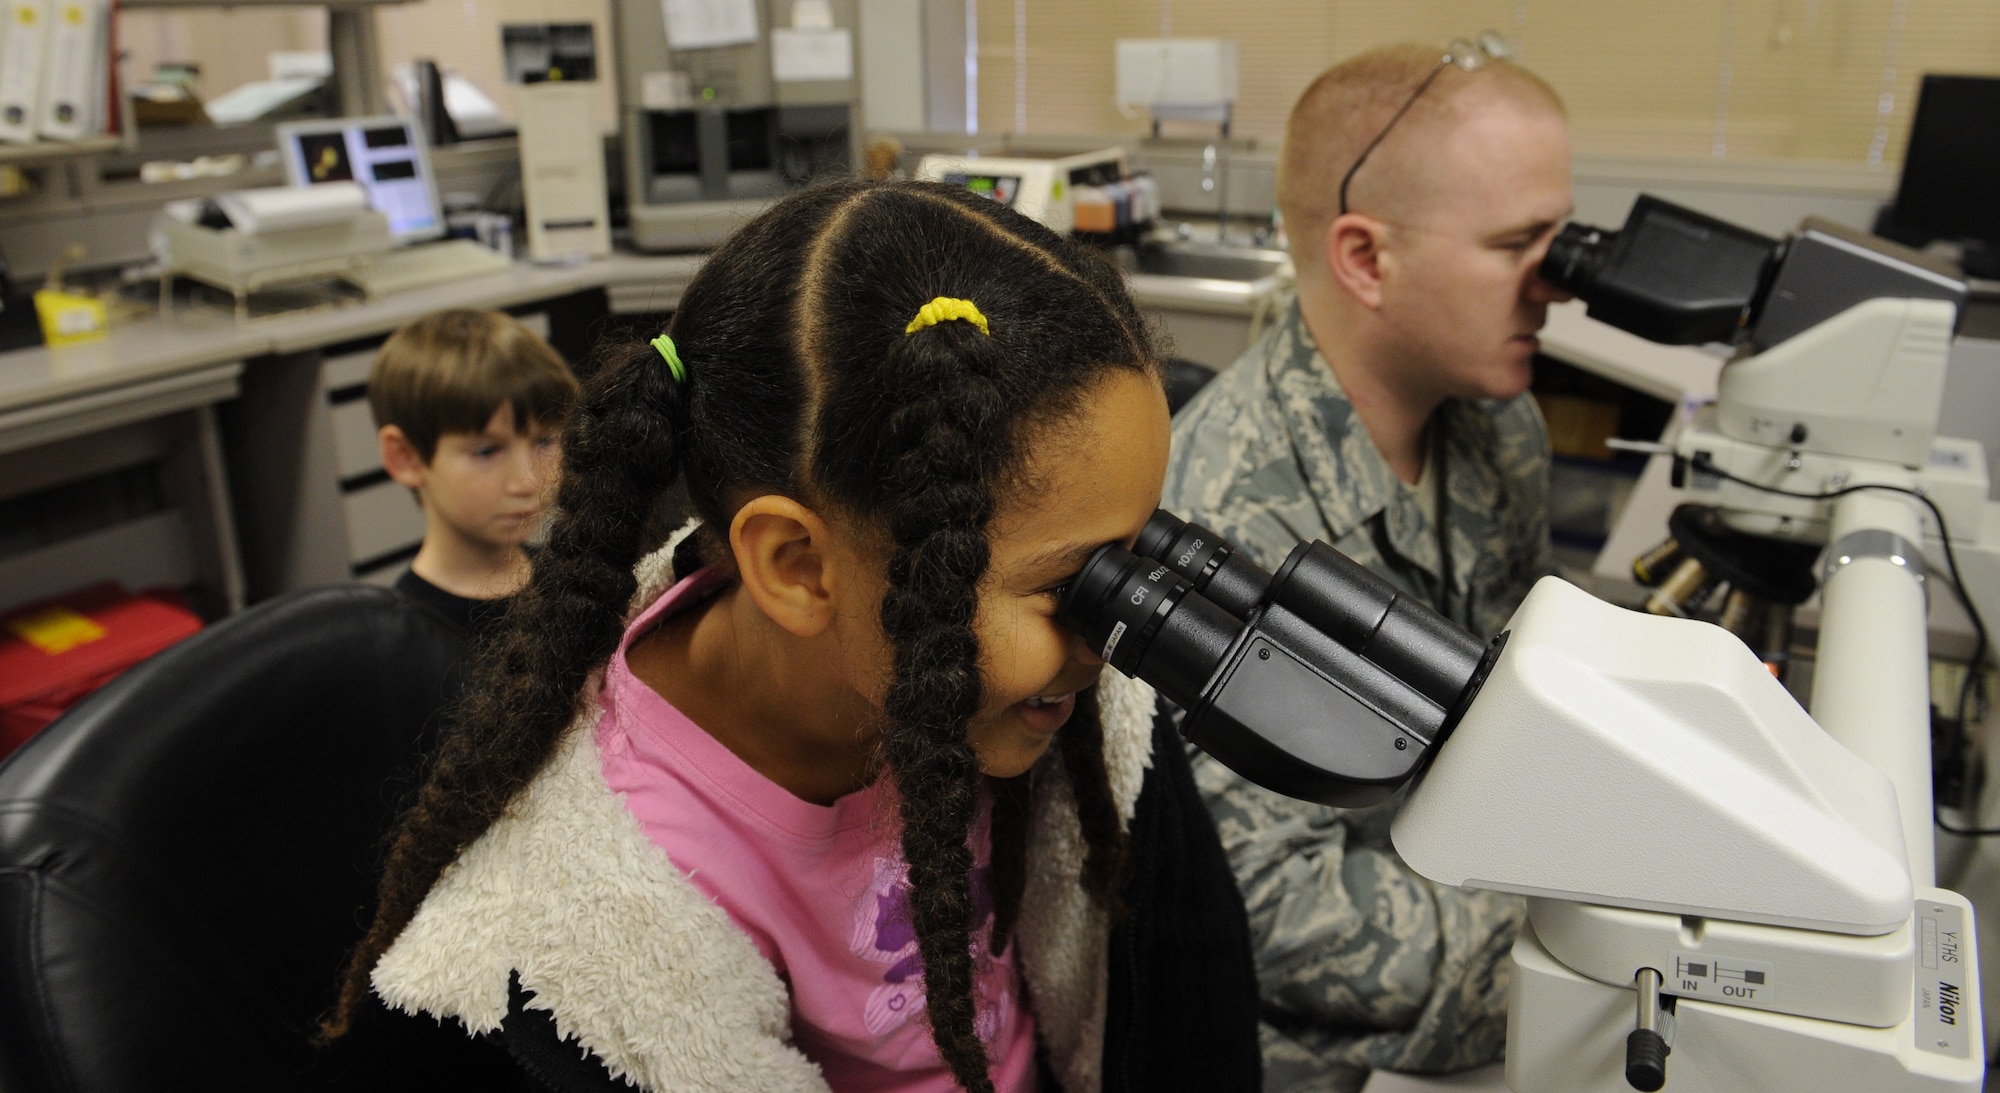 A Stearley Heights Elementary student peers through a microscope as U.S. Air Force Staff Sgt. Thomas Guinn, 18th Medical Support Squadron NCO in charge of shipping, rotates the slides on Kadena Air Base, Japan, March 14, 2013. Stearley Heights students conducted a science project where they grew bacteria cultures in their classroom and used the Kadena clinic's microscope to see the different types of bacteria. (U.S. Air Force photo/Airman 1st Class Keith A. James)